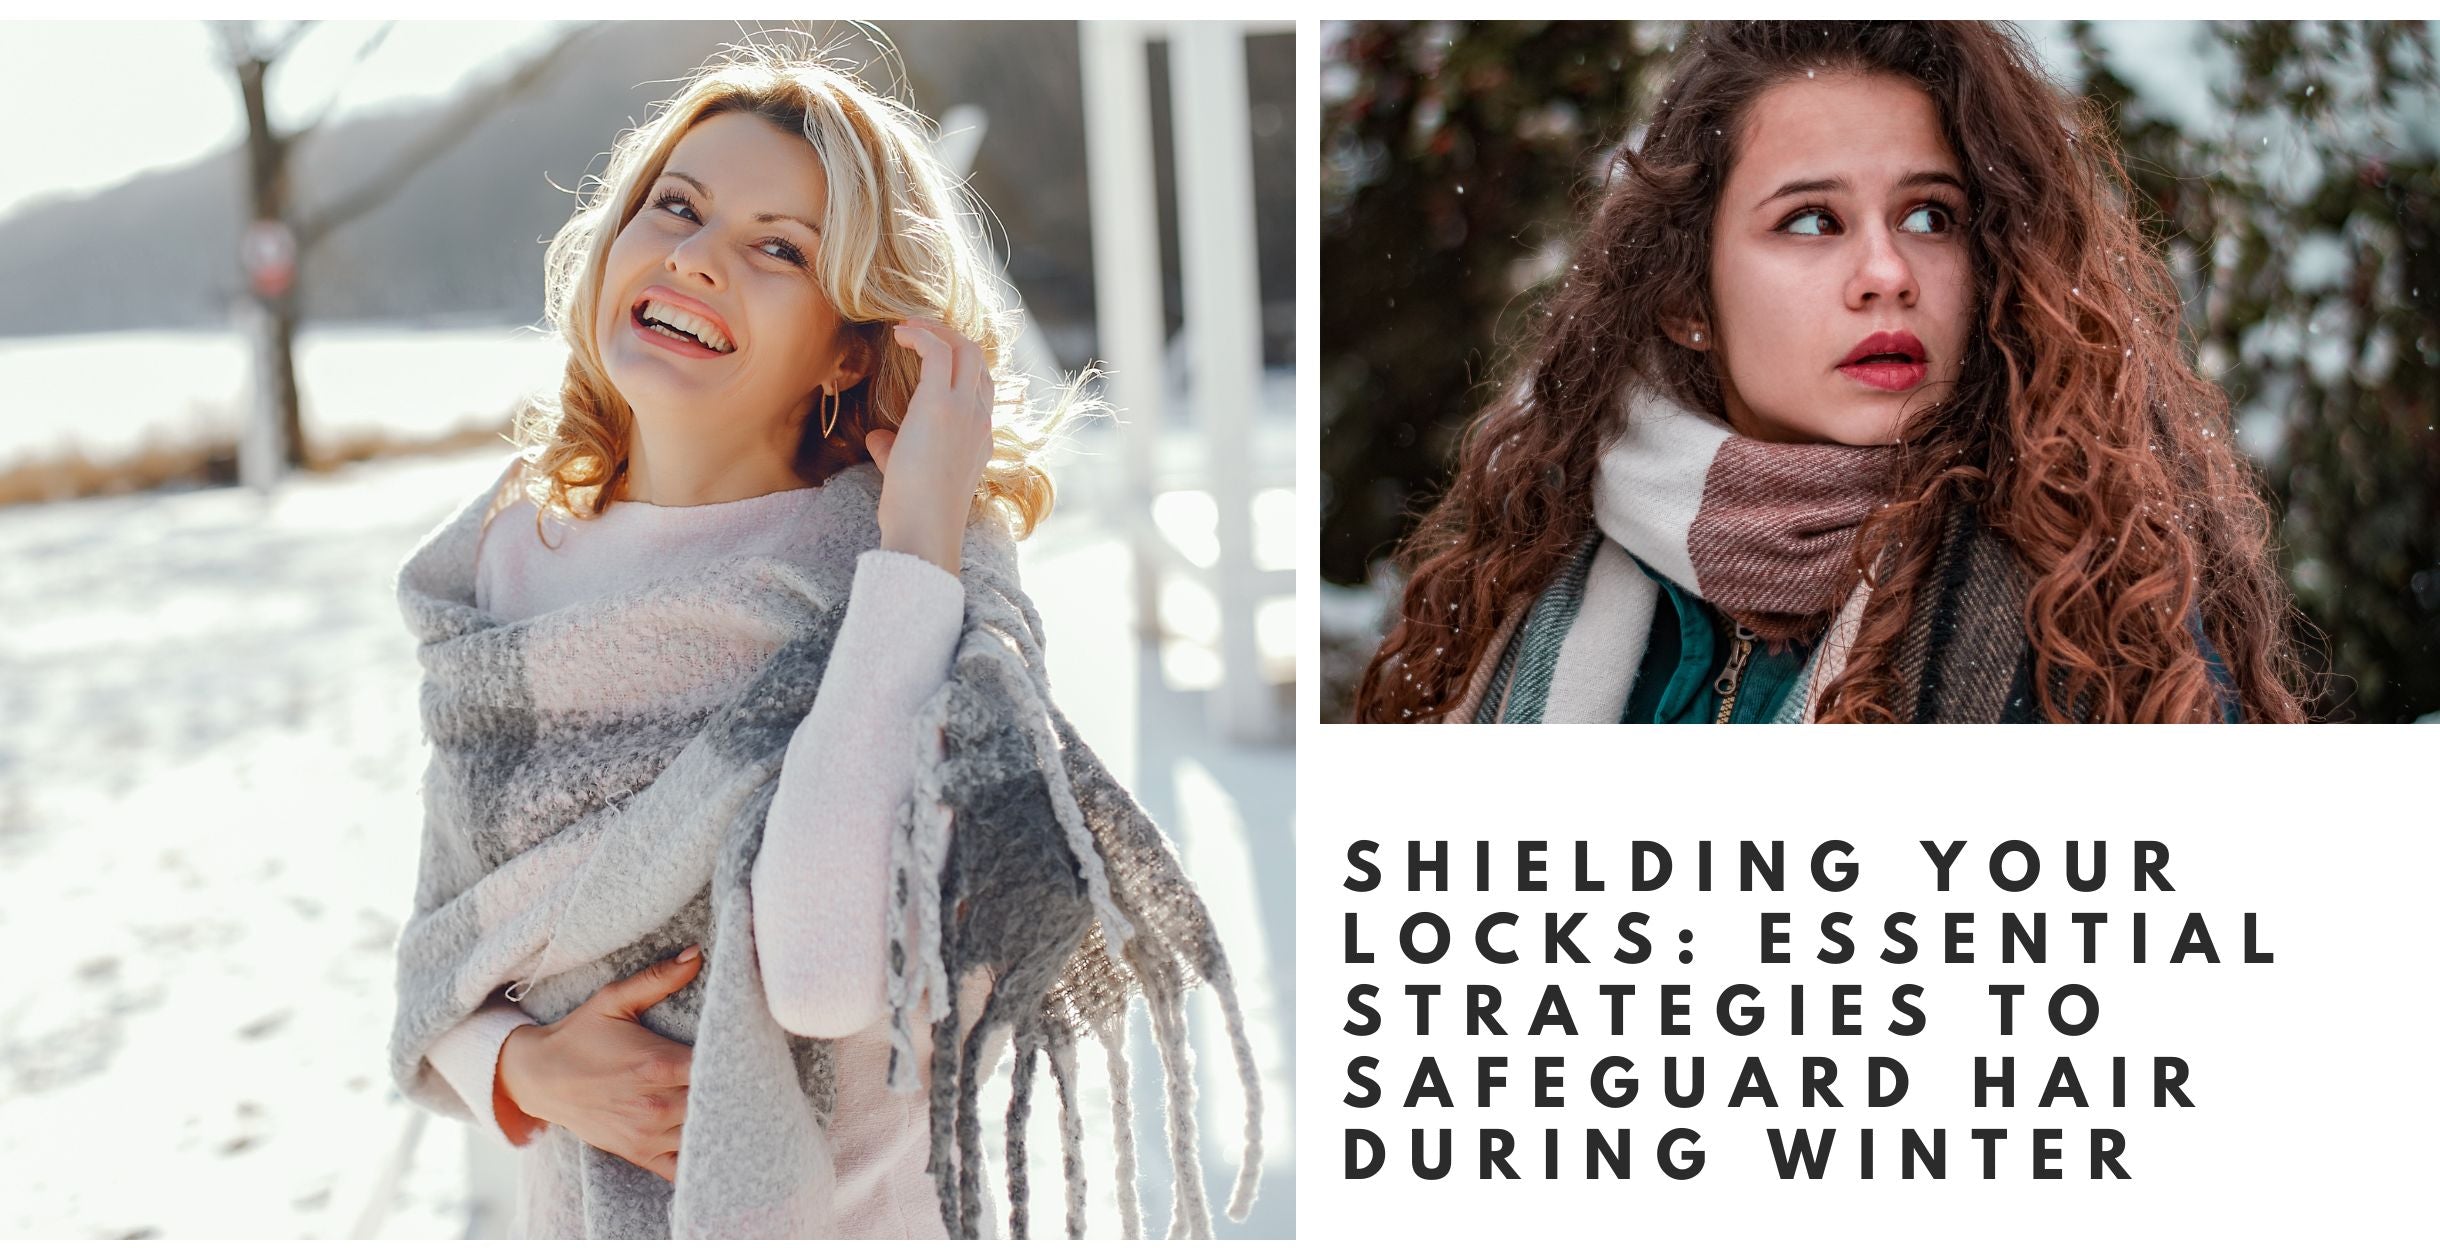 Shielding Your Locks: Essential Strategies to Safeguard Hair During Winter